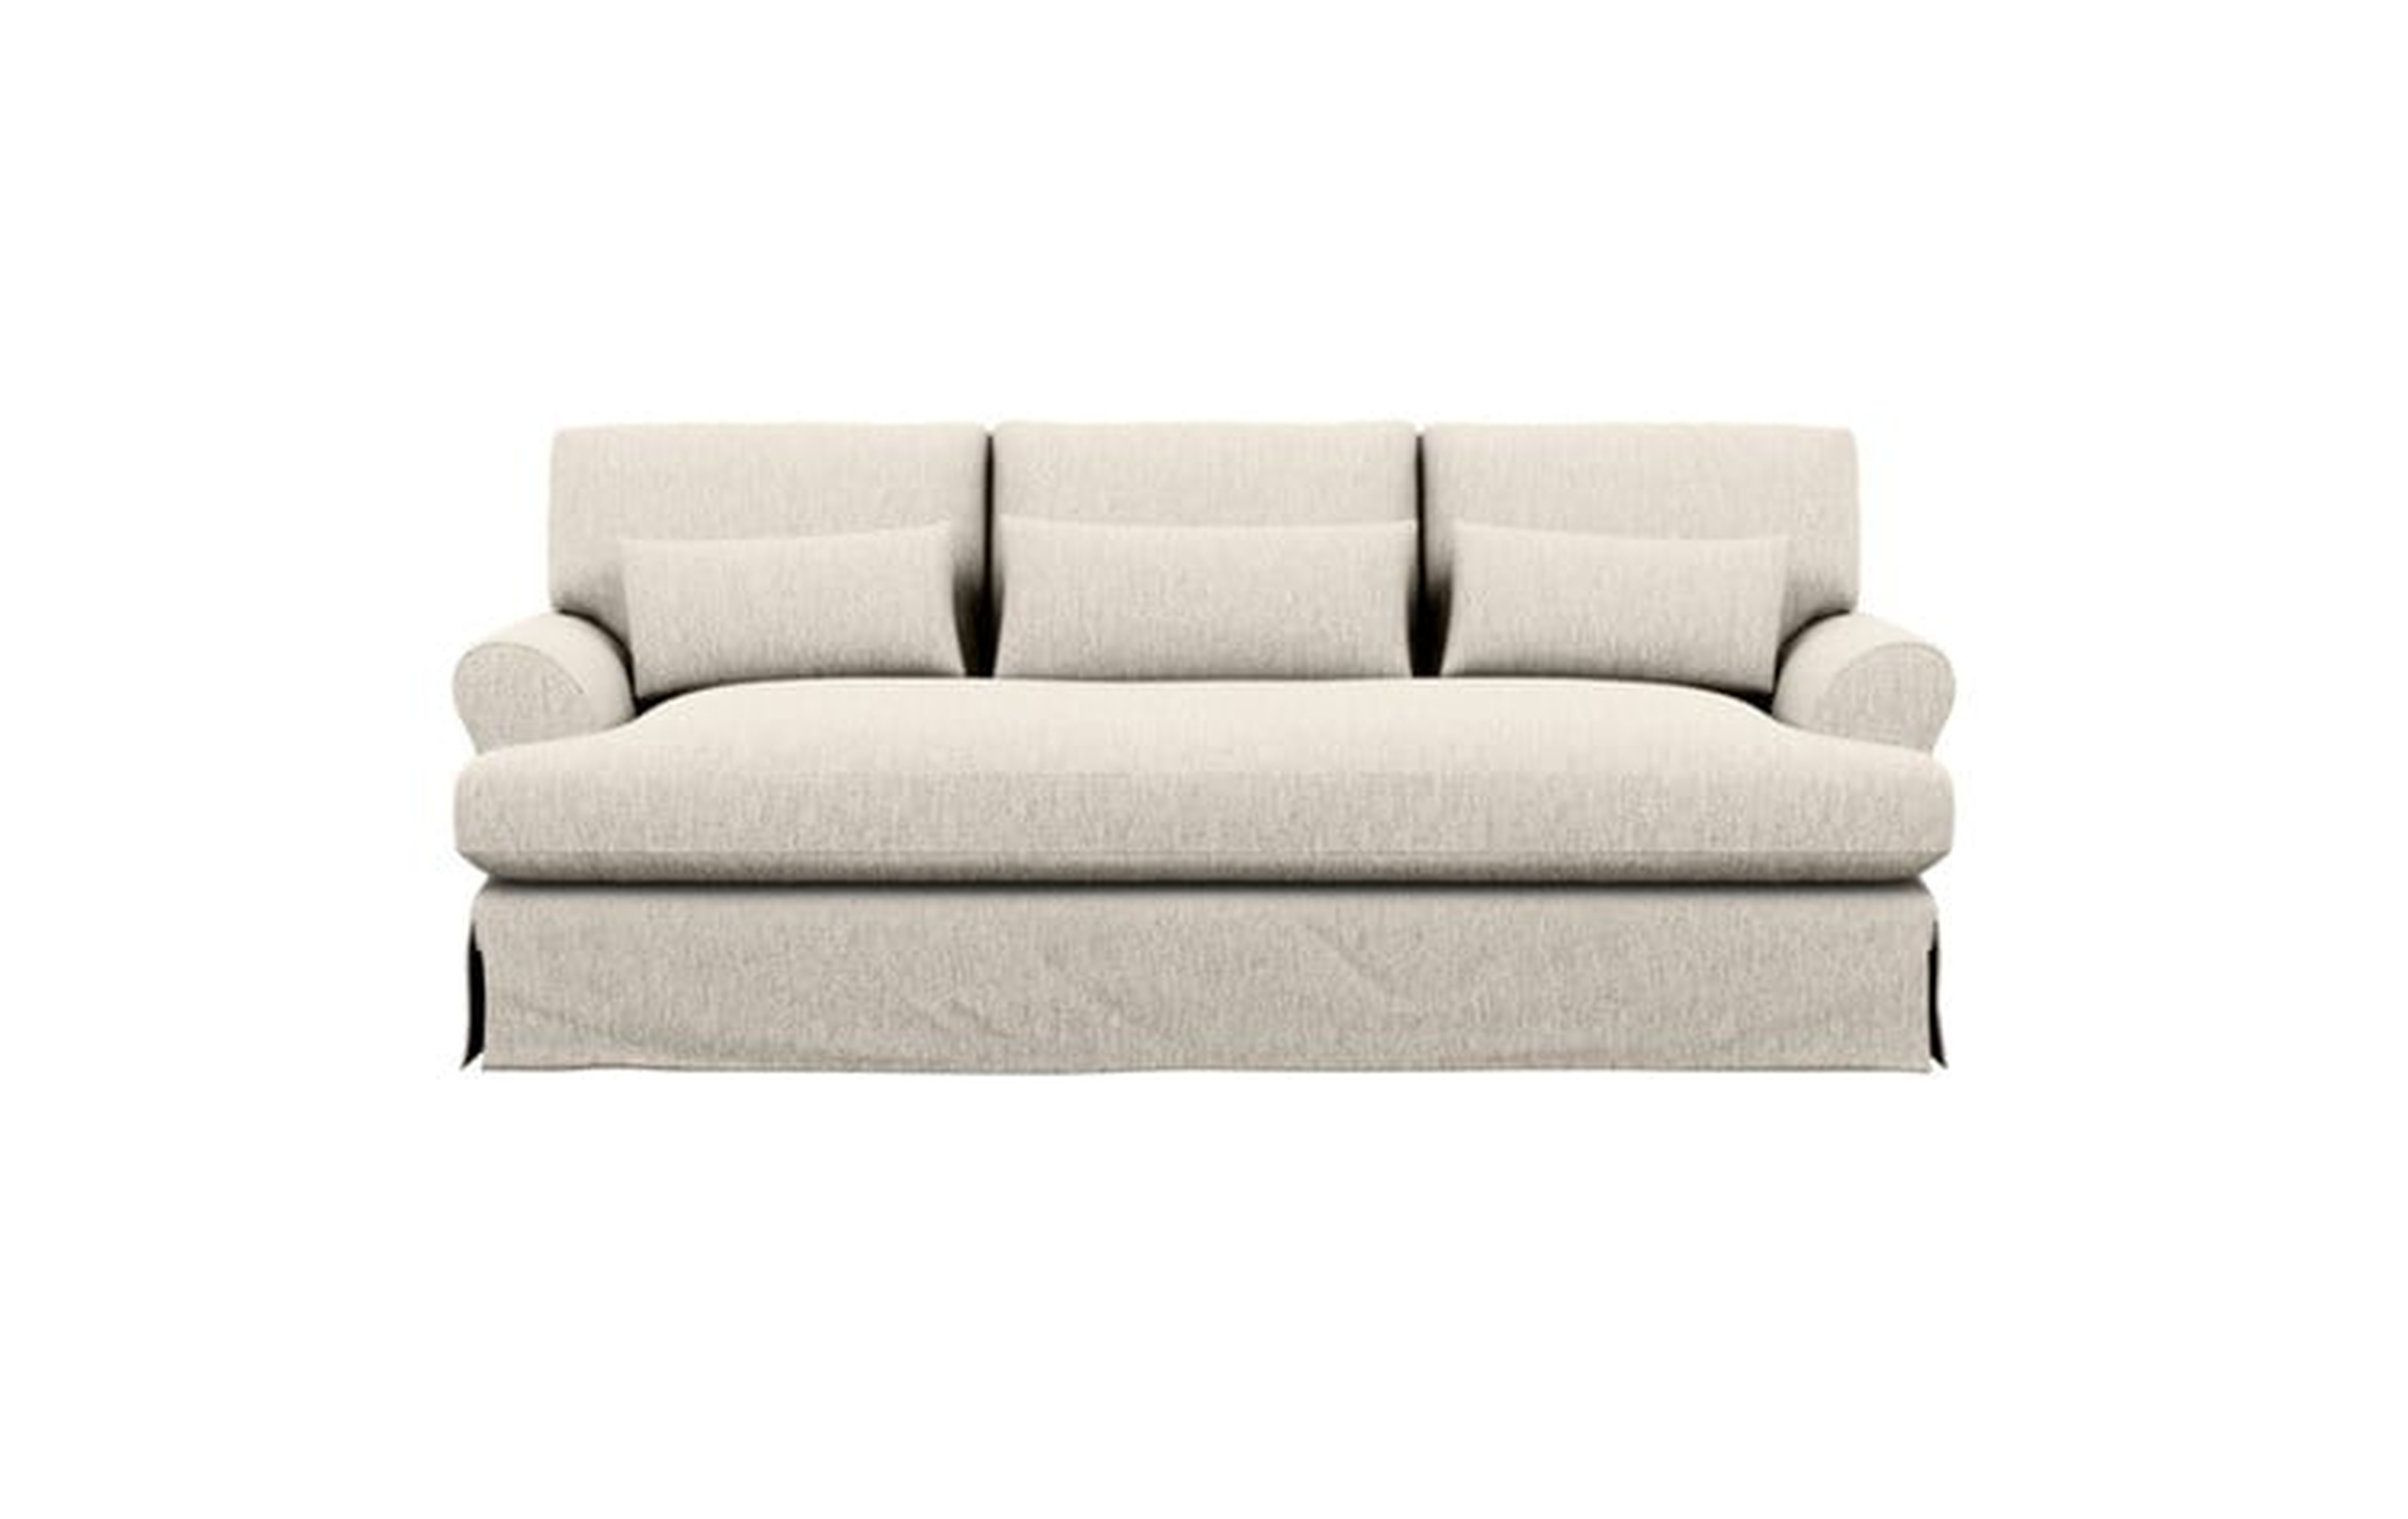 Maxwell Slipcovered Sofa with Wheat Fabric and Bench Cushion - Interior Define